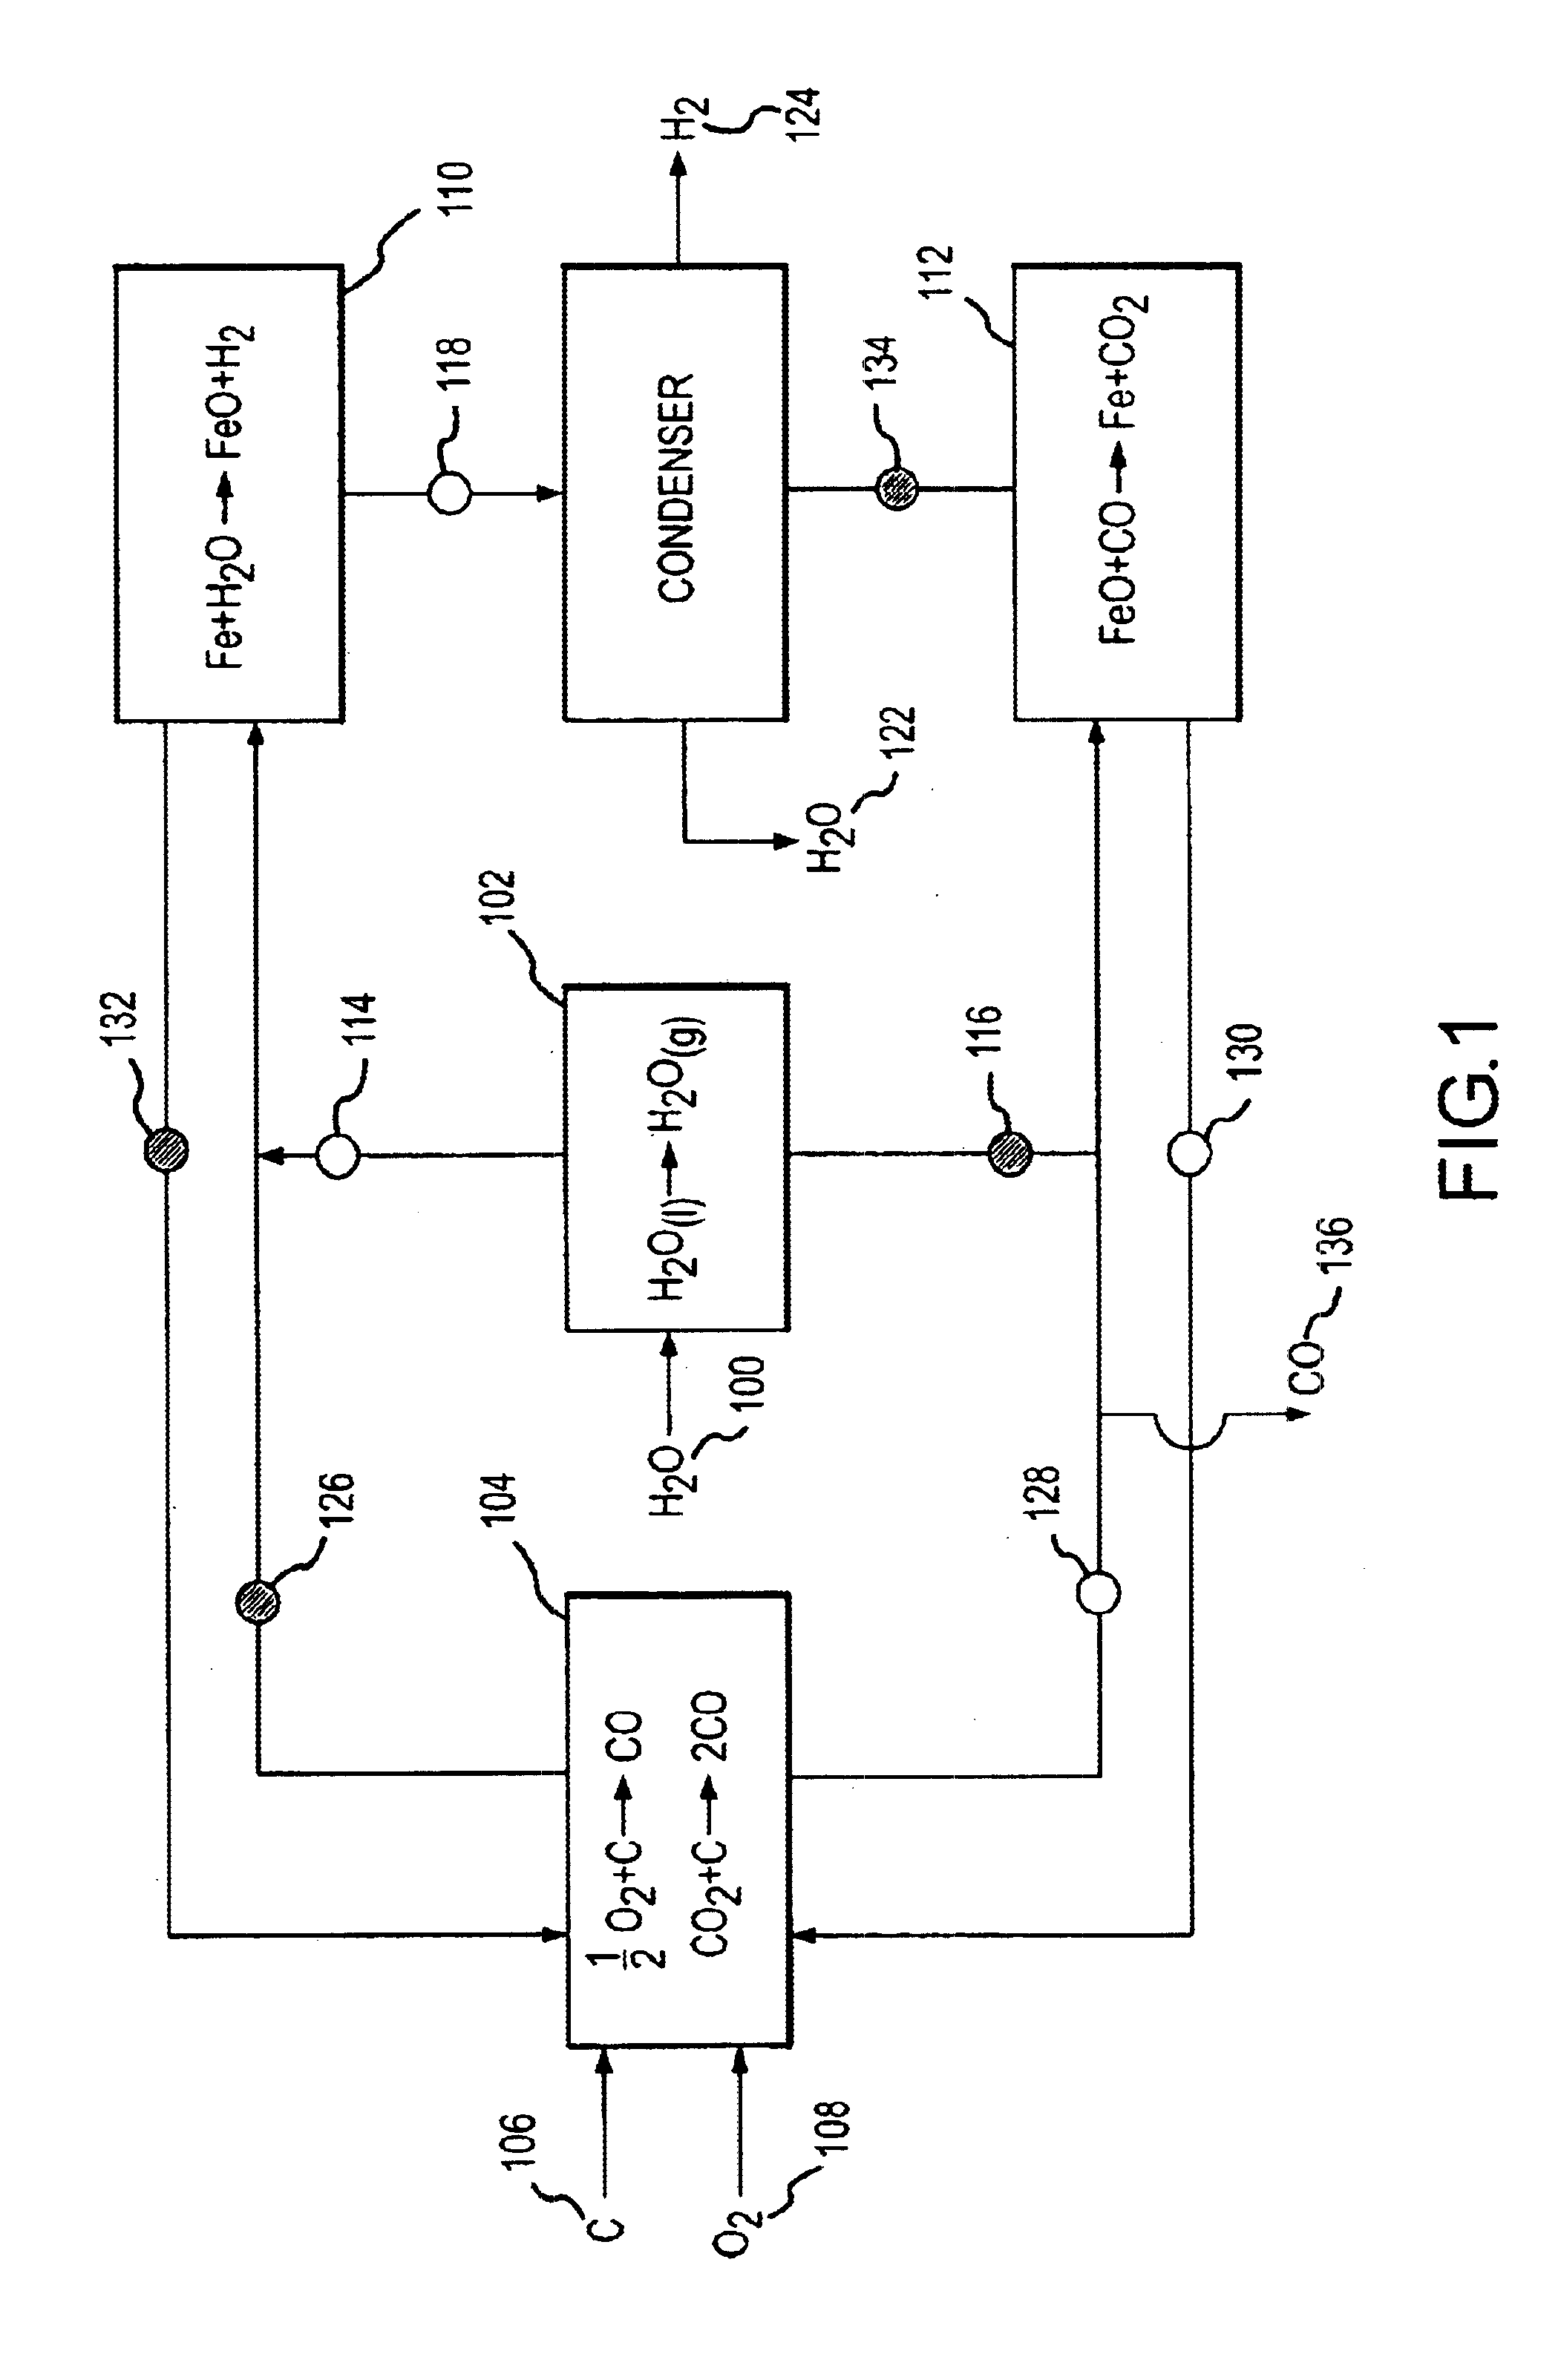 Method and apparatus for the production of hydrogen gas